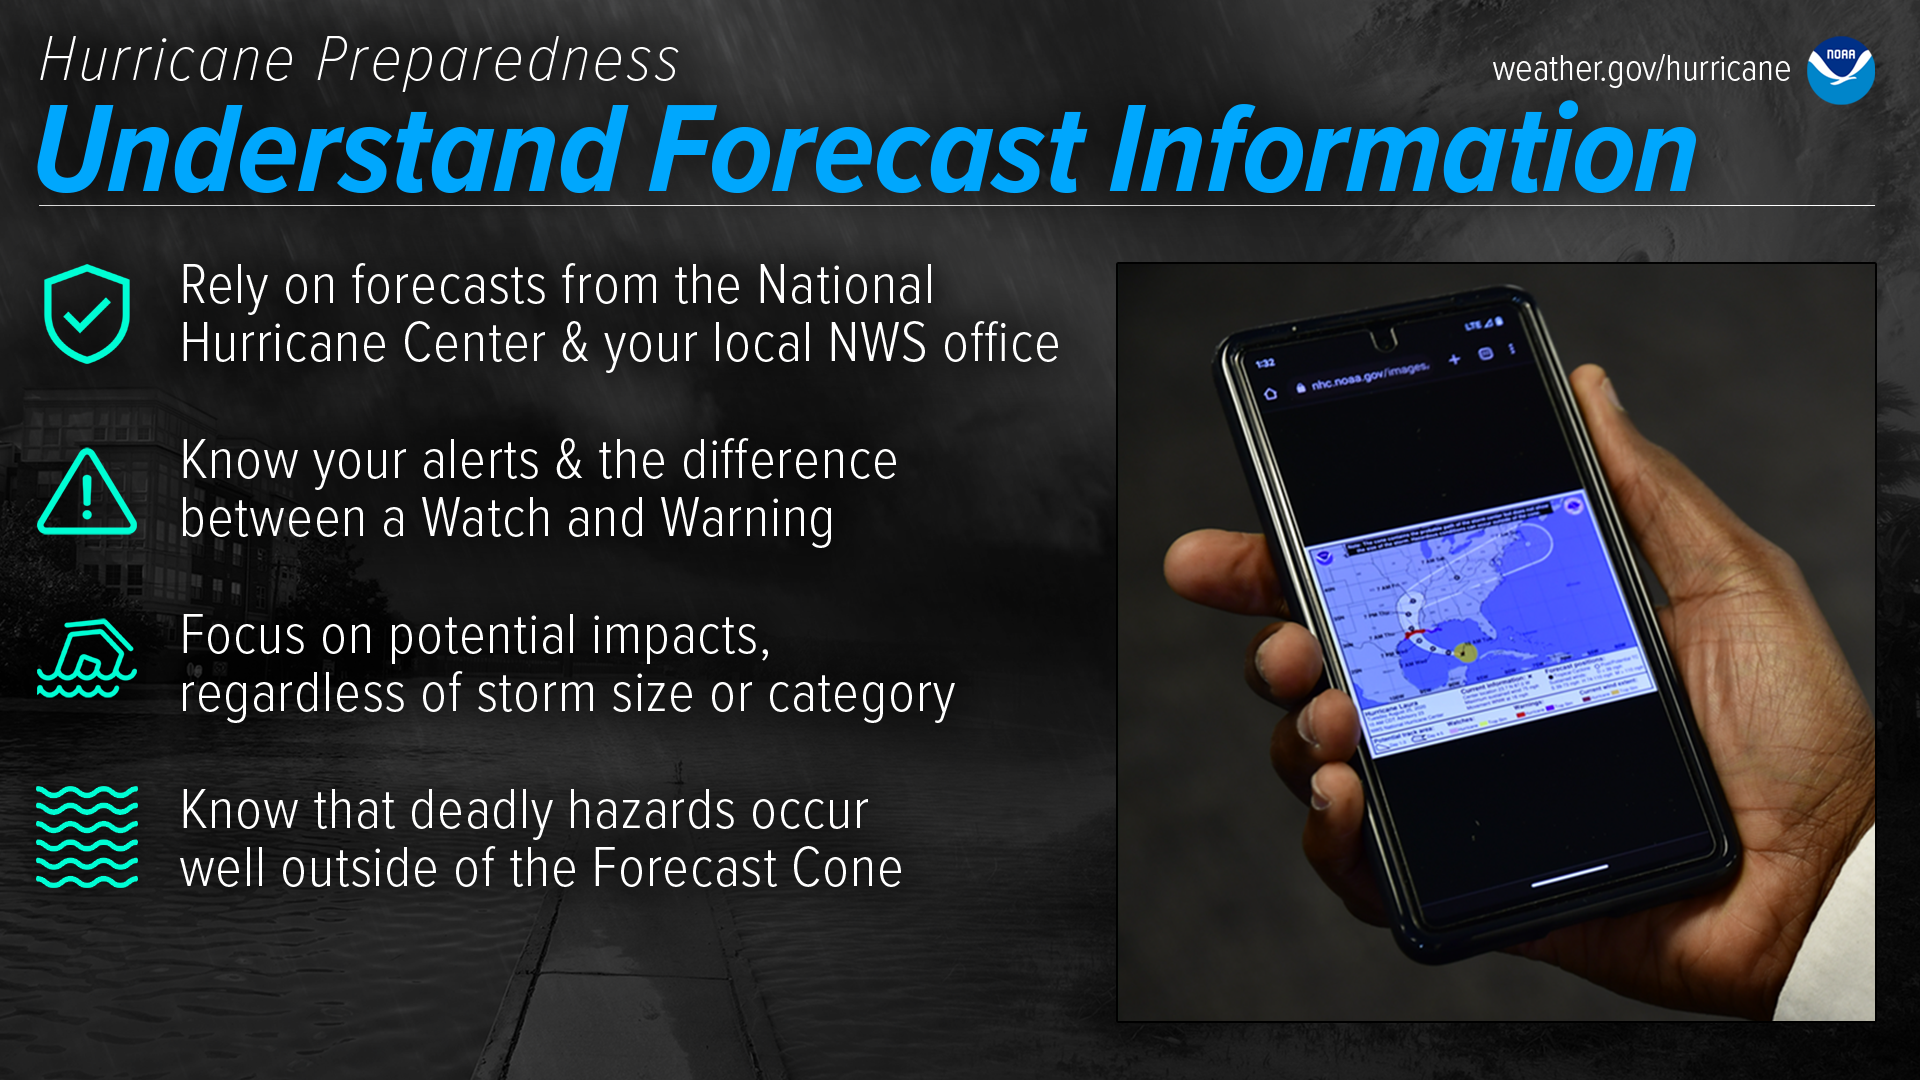 Hurricane Preparedness - Understand Forecast Information. Rely on forecasts from the National Hurricane Center and your local NWS office. Know your alerts & the difference between a Watch and Warning. Focus on potential impacts, regardless of storm size or category. Know that deadly hazards occur well outside of the Forecast Cone. Image credit: NOAA's National Weather Service